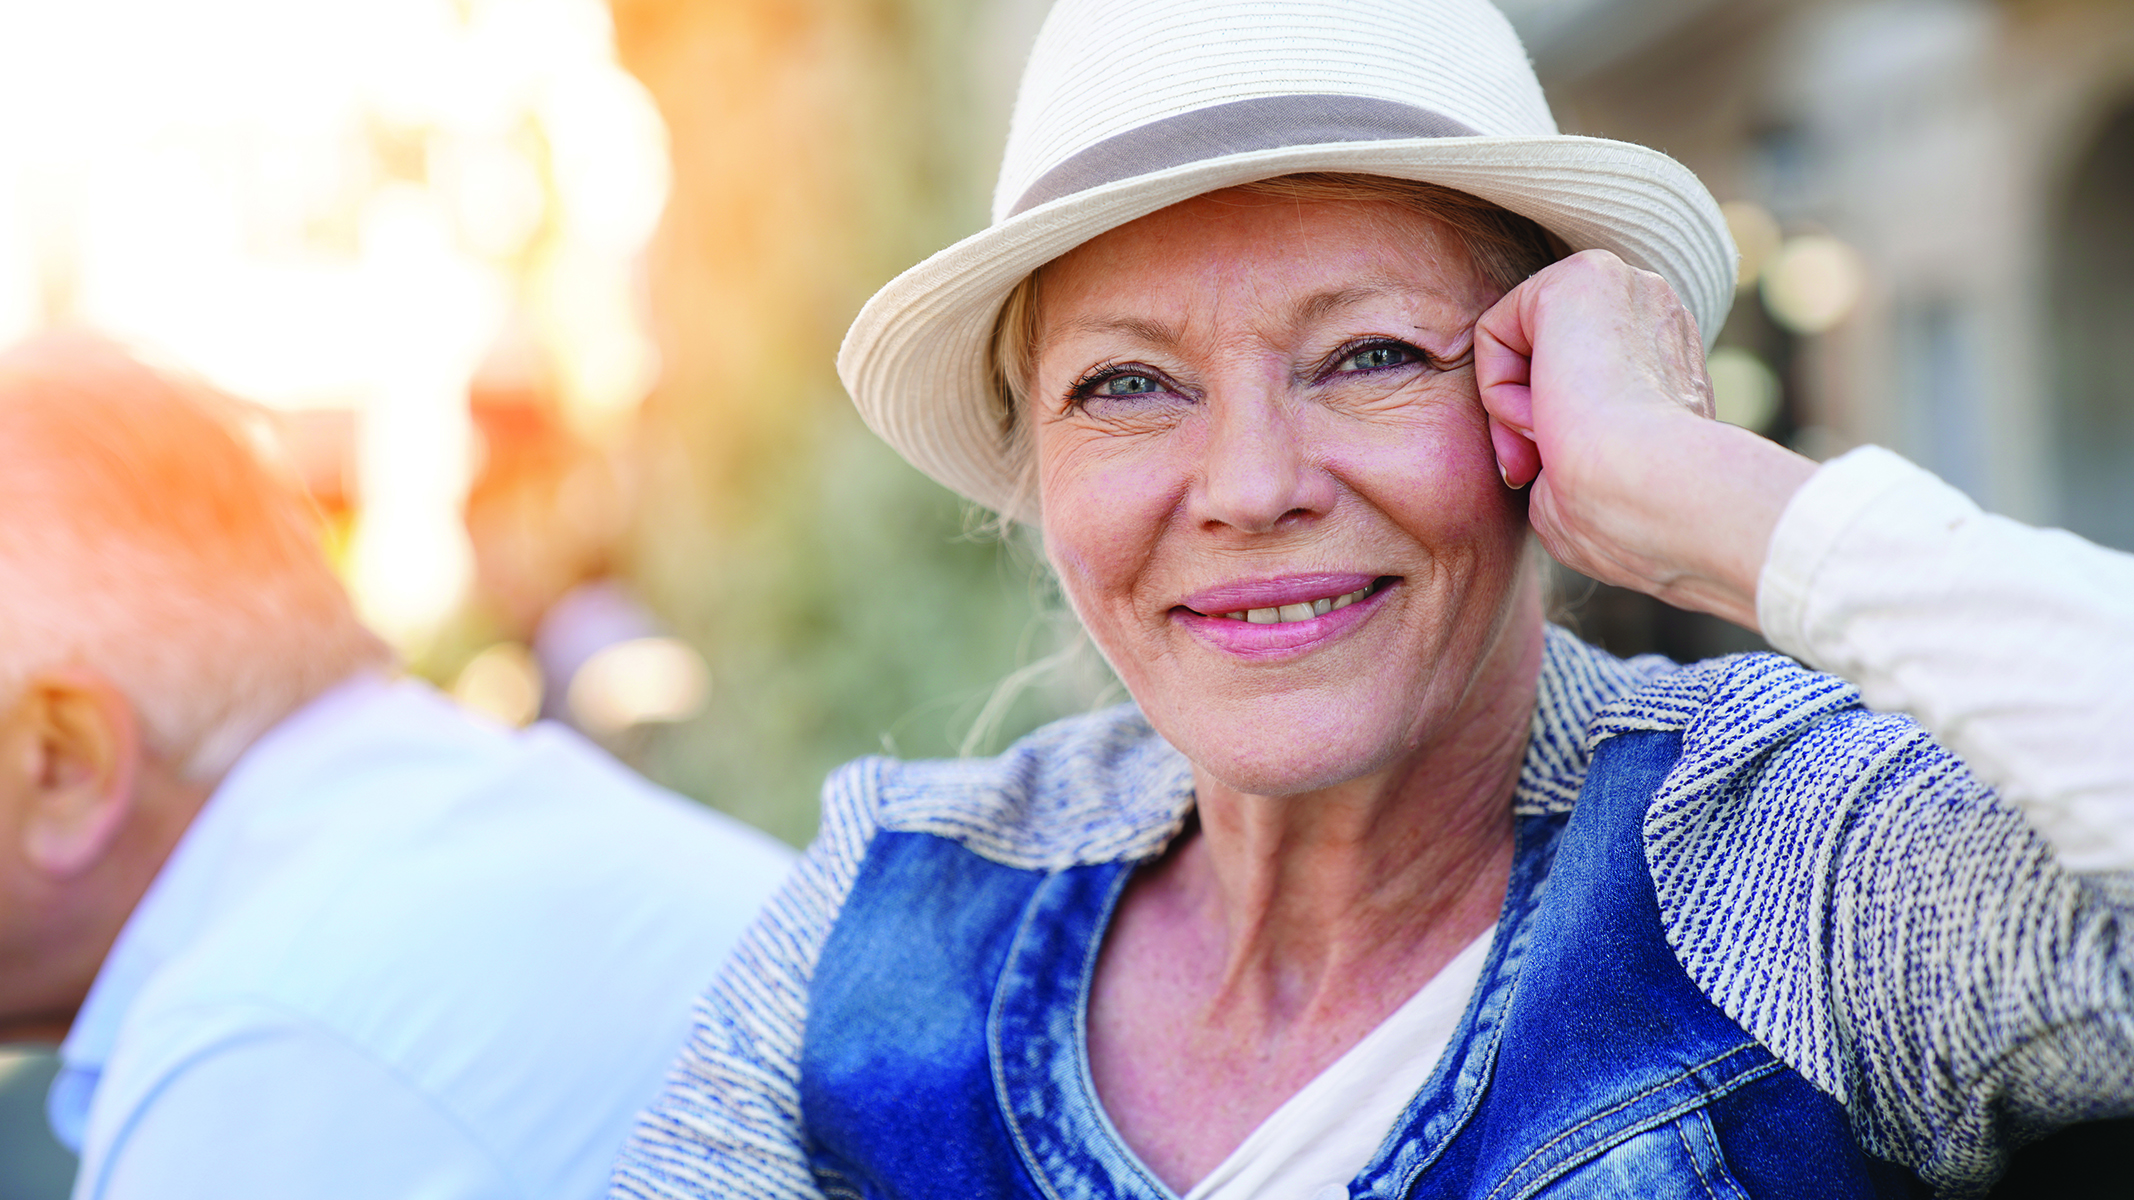 Senior woman wearing a hat smiling while looking at the camera.